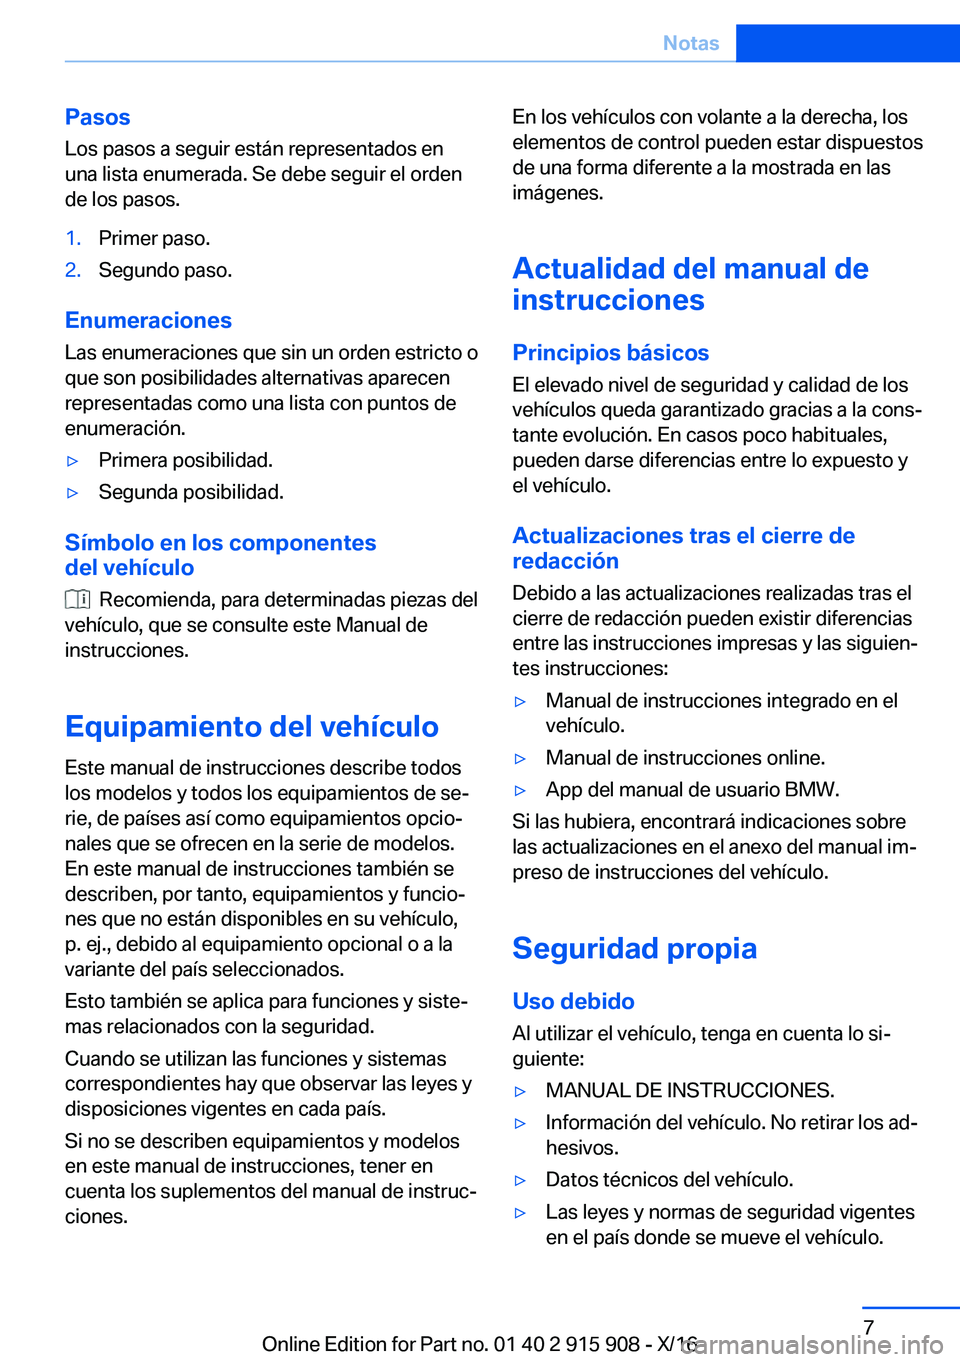 BMW X4 2017  Manuales de Empleo (in Spanish) �P�a�s�o�s
�L�o�s� �p�a�s�o�s� �a� �s�e�g�u�i�r� �e�s�t�á�n� �r�e�p�r�e�s�e�n�t�a�d�o�s� �e�n
�u�n�a� �l�i�s�t�a� �e�n�u�m�e�r�a�d�a�.� �S�e� �d�e�b�e� �s�e�g�u�i�r� �e�l� �o�r�d�e�n
�d�e� �l�o�s� �p